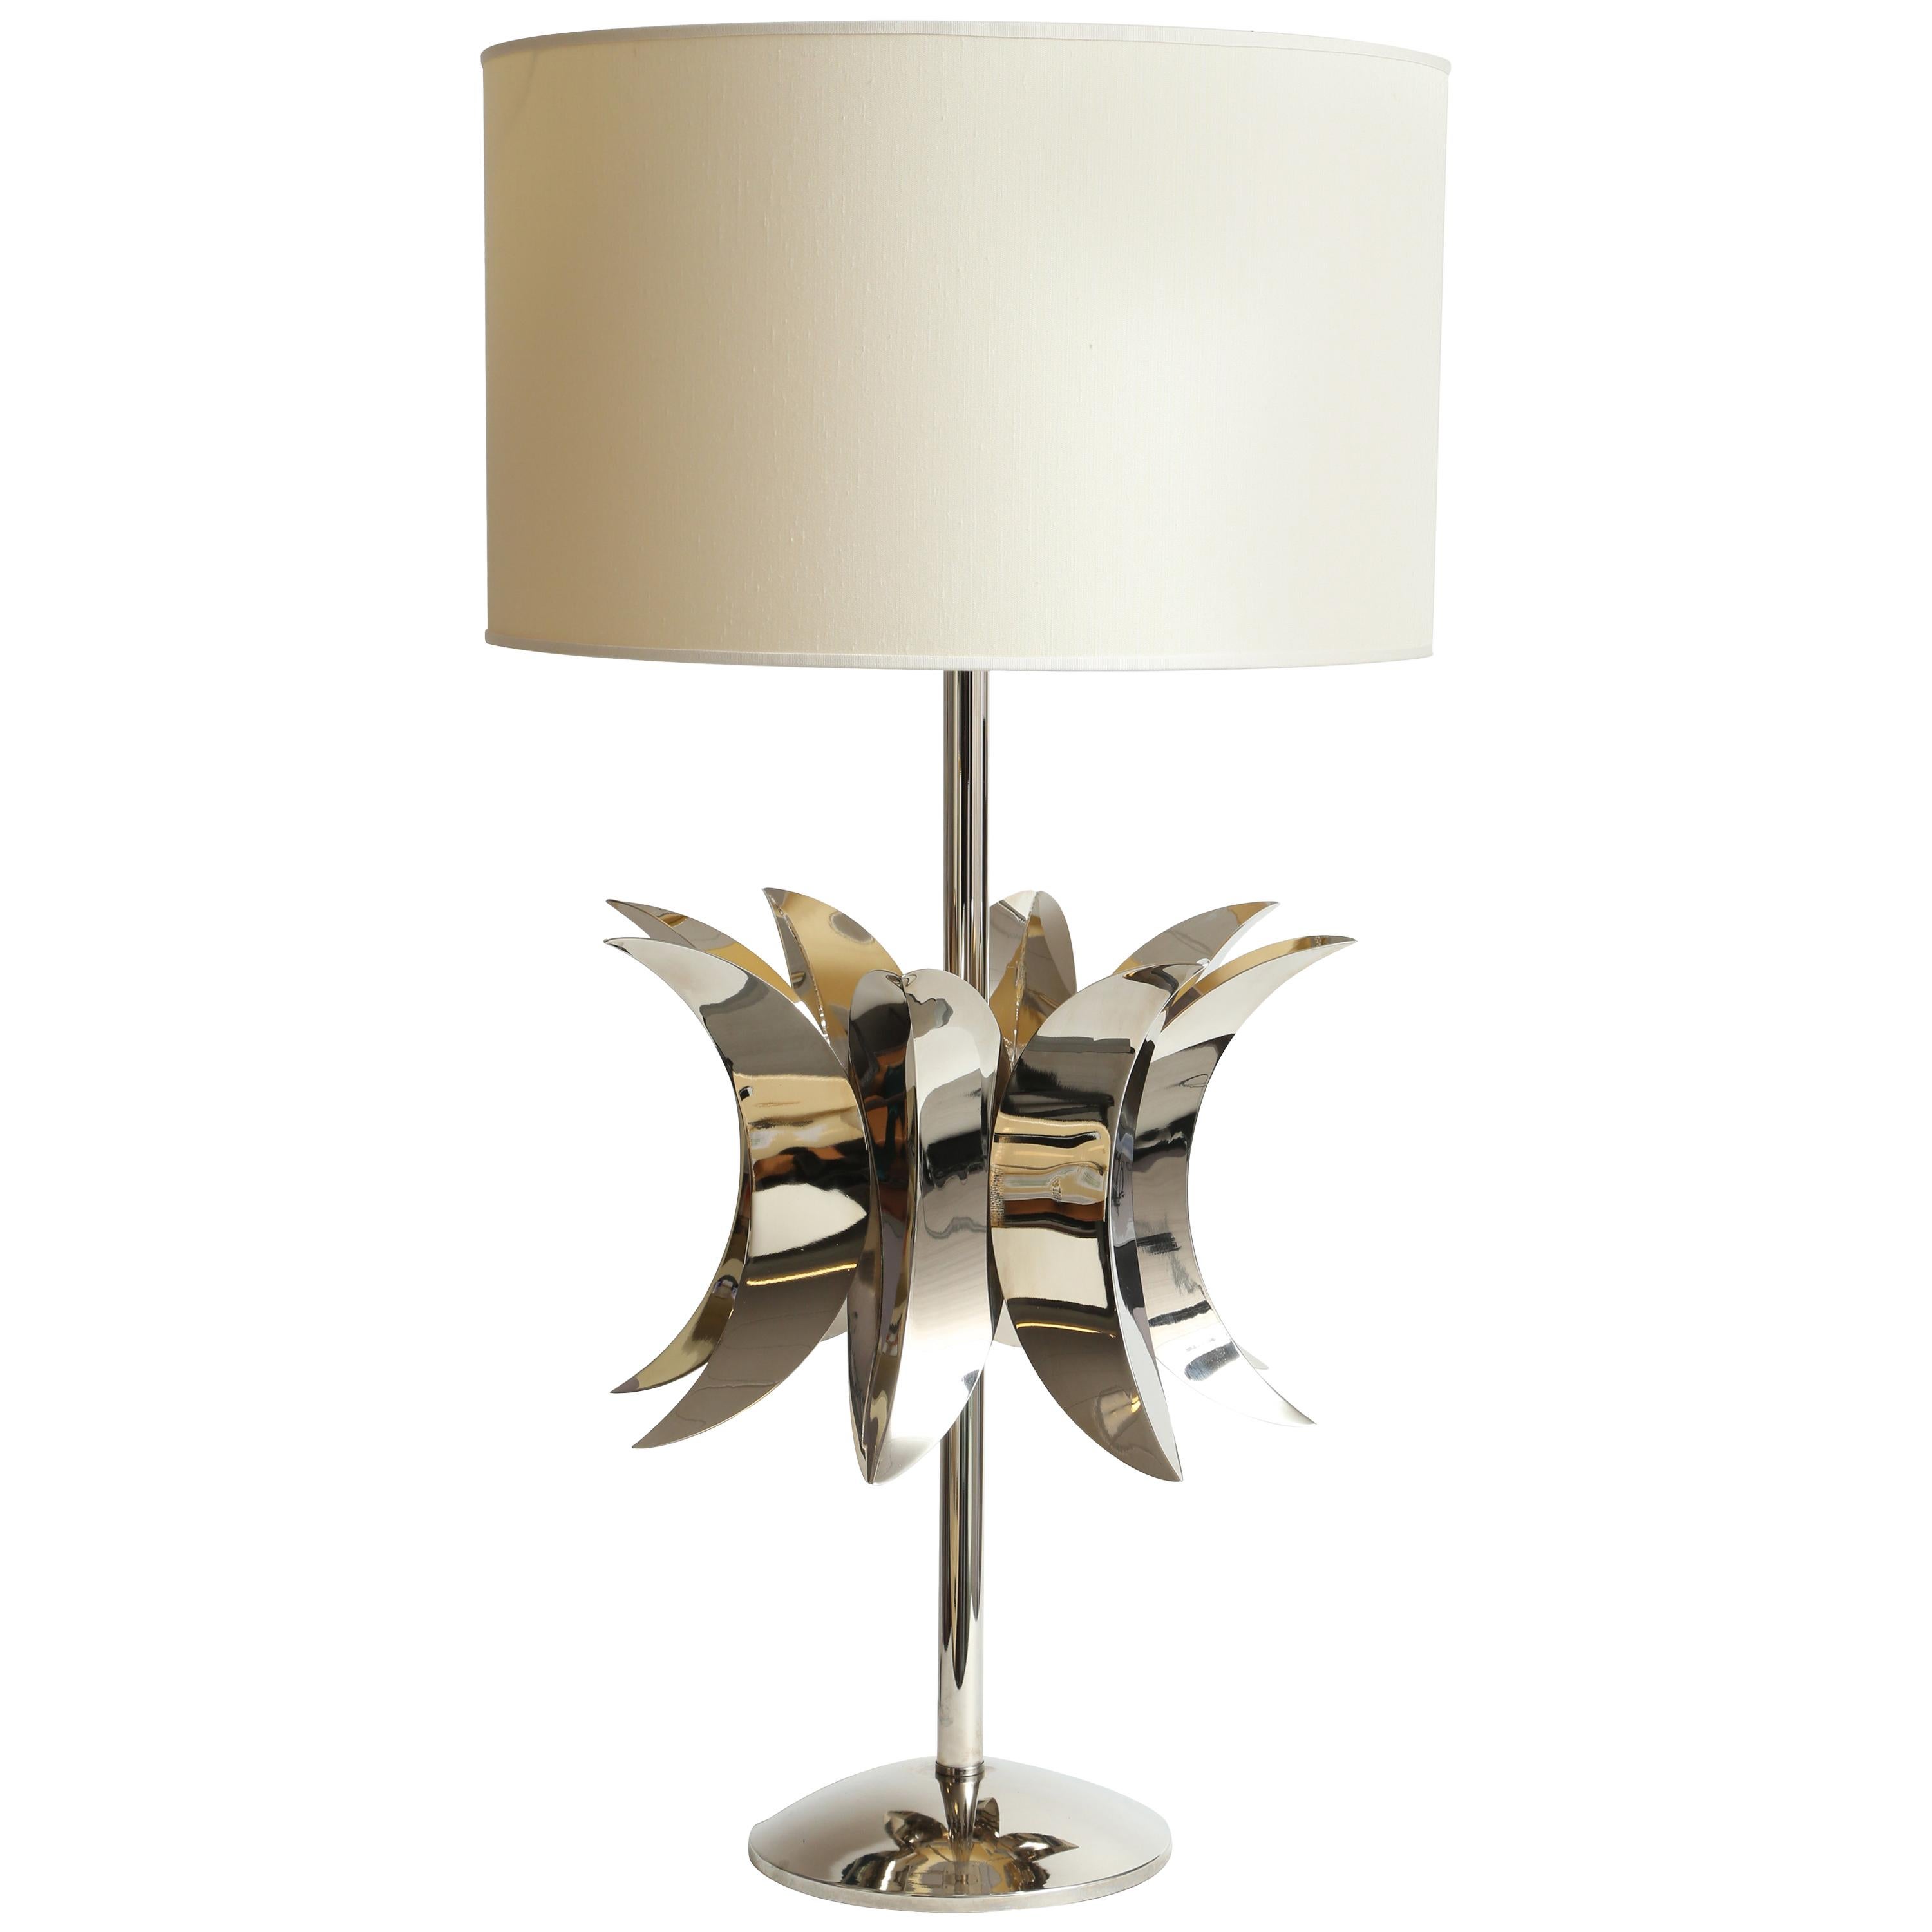 Luna Table Lamp by Selezioni Domus, Made in Italy For Sale